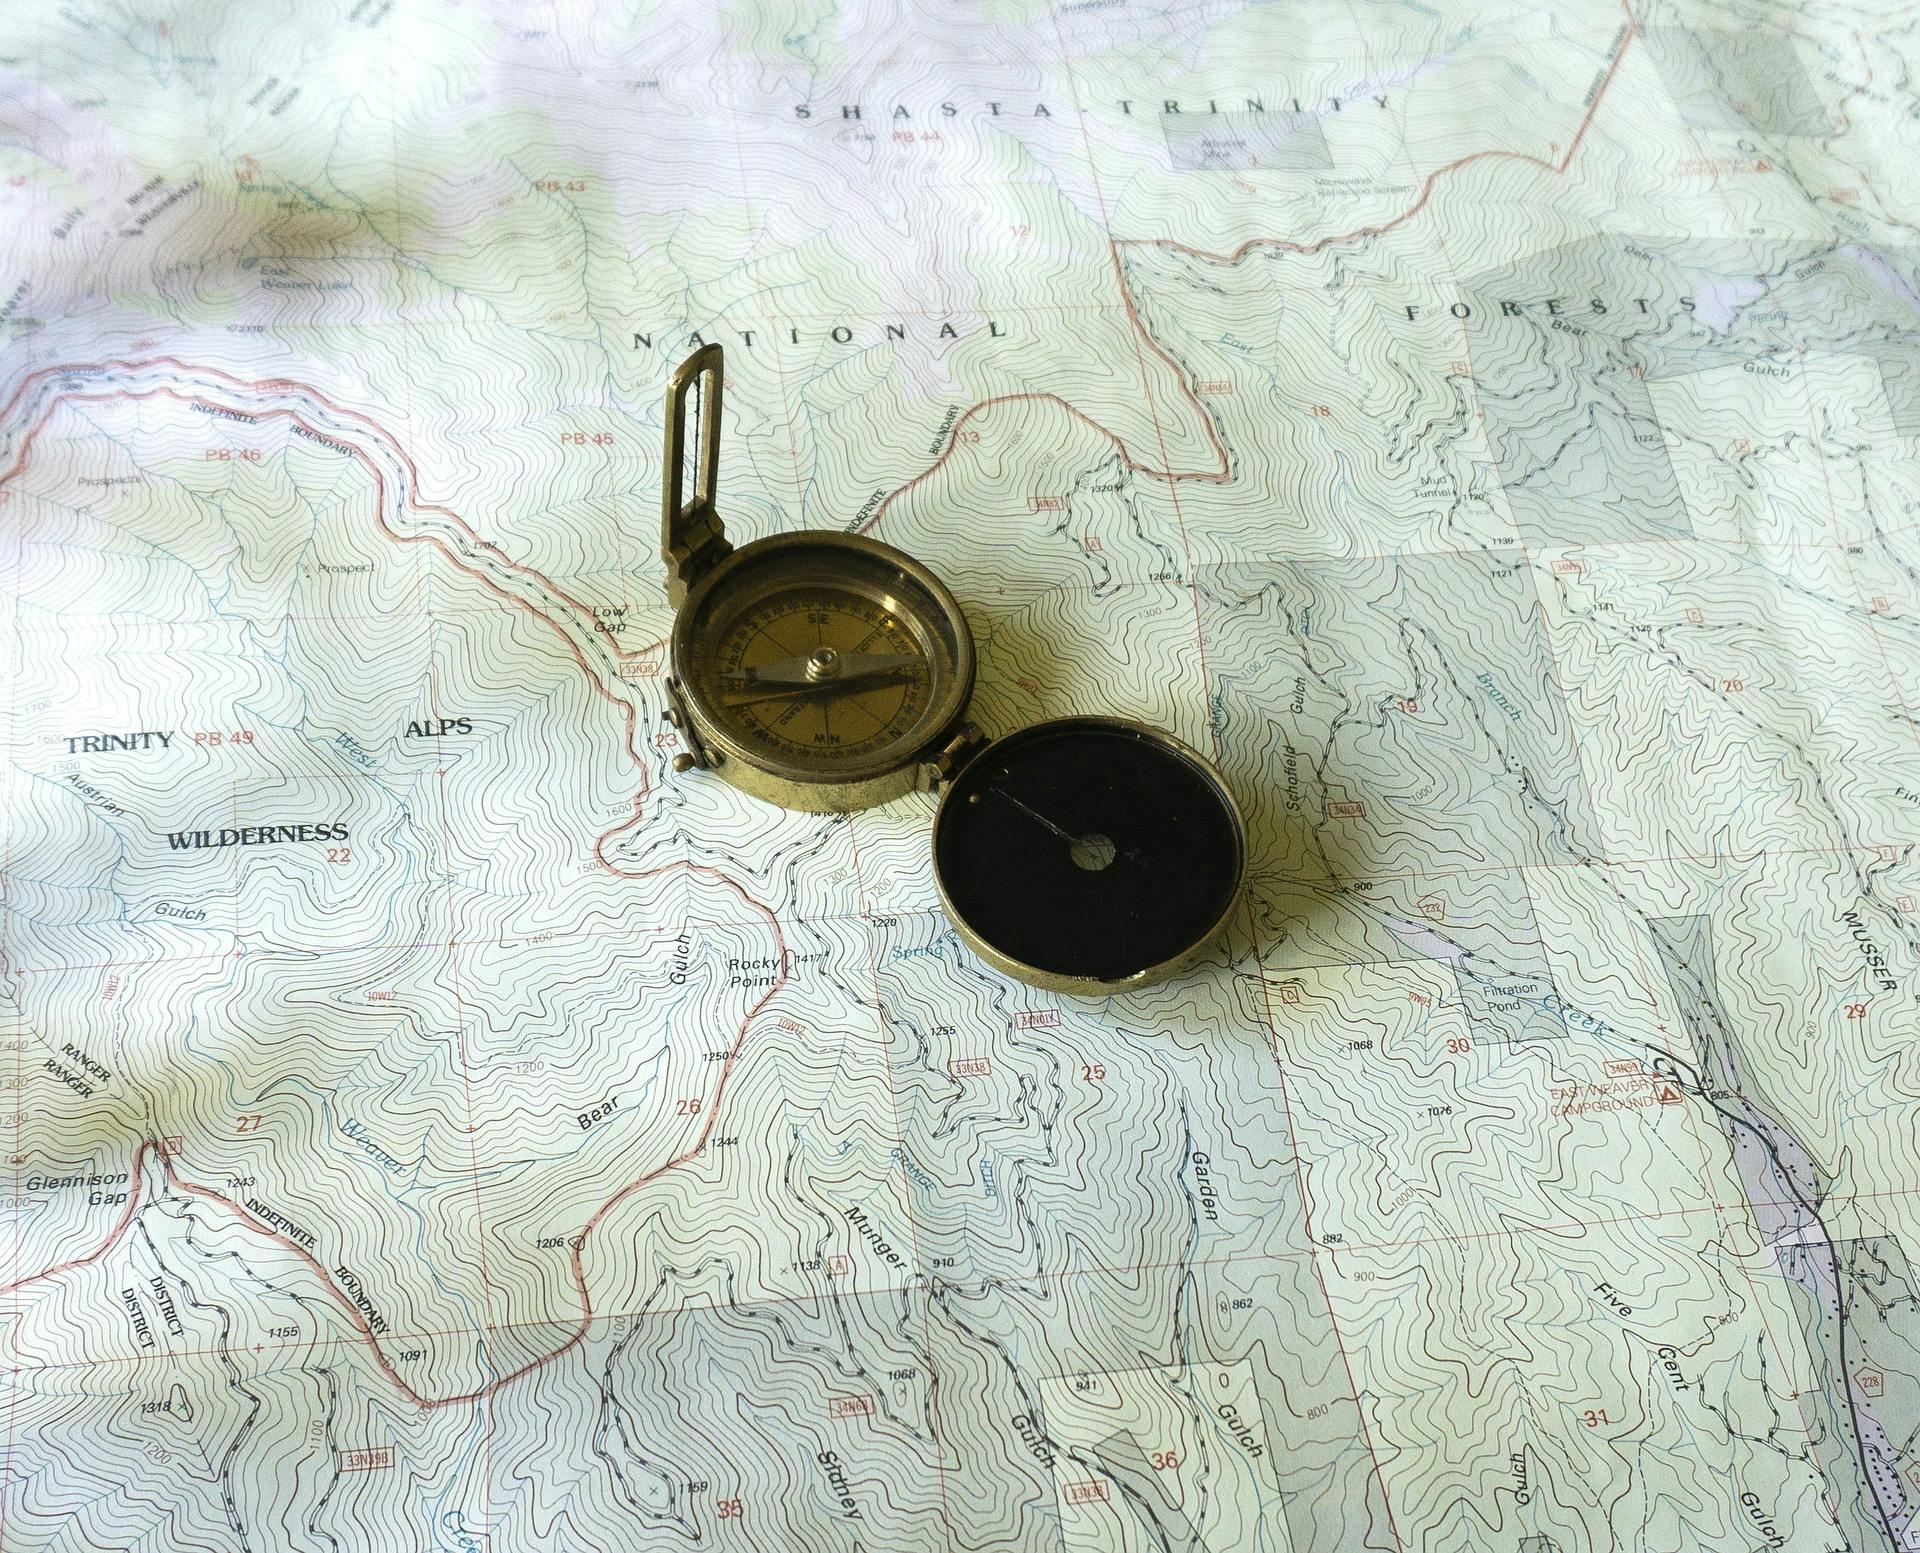 A compass on a map.